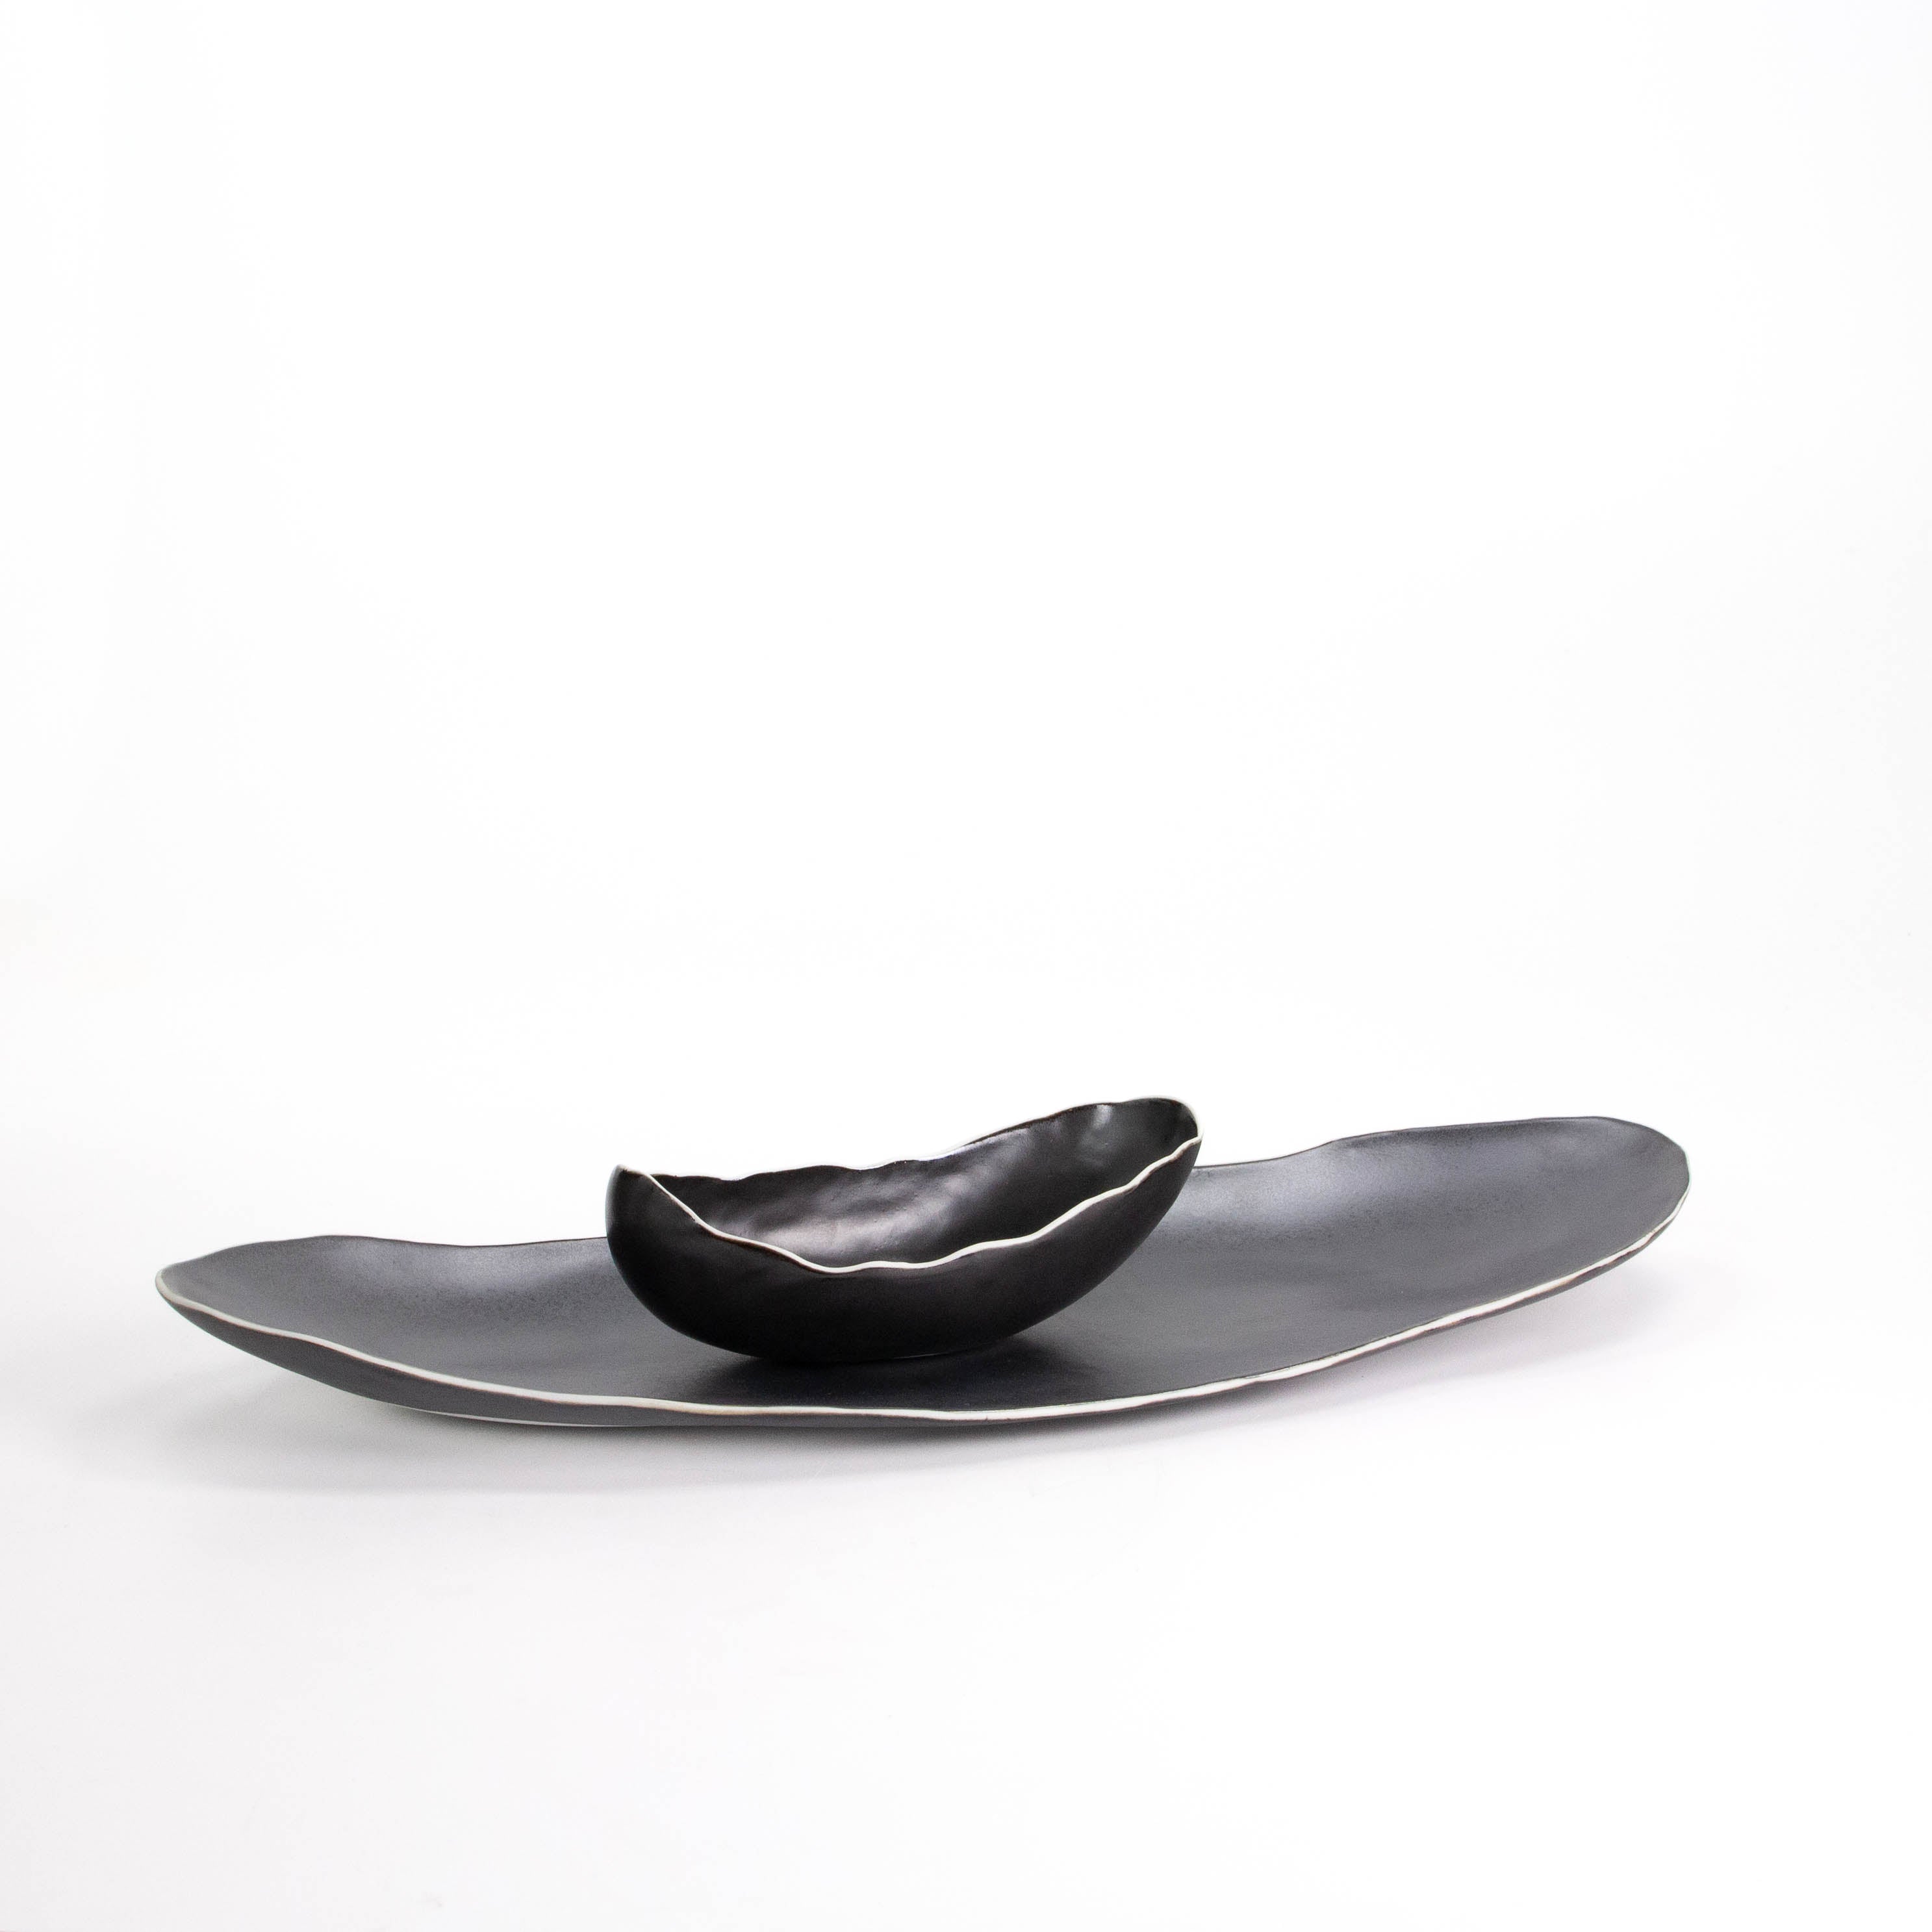 Black Appetizer Bowl with Tray